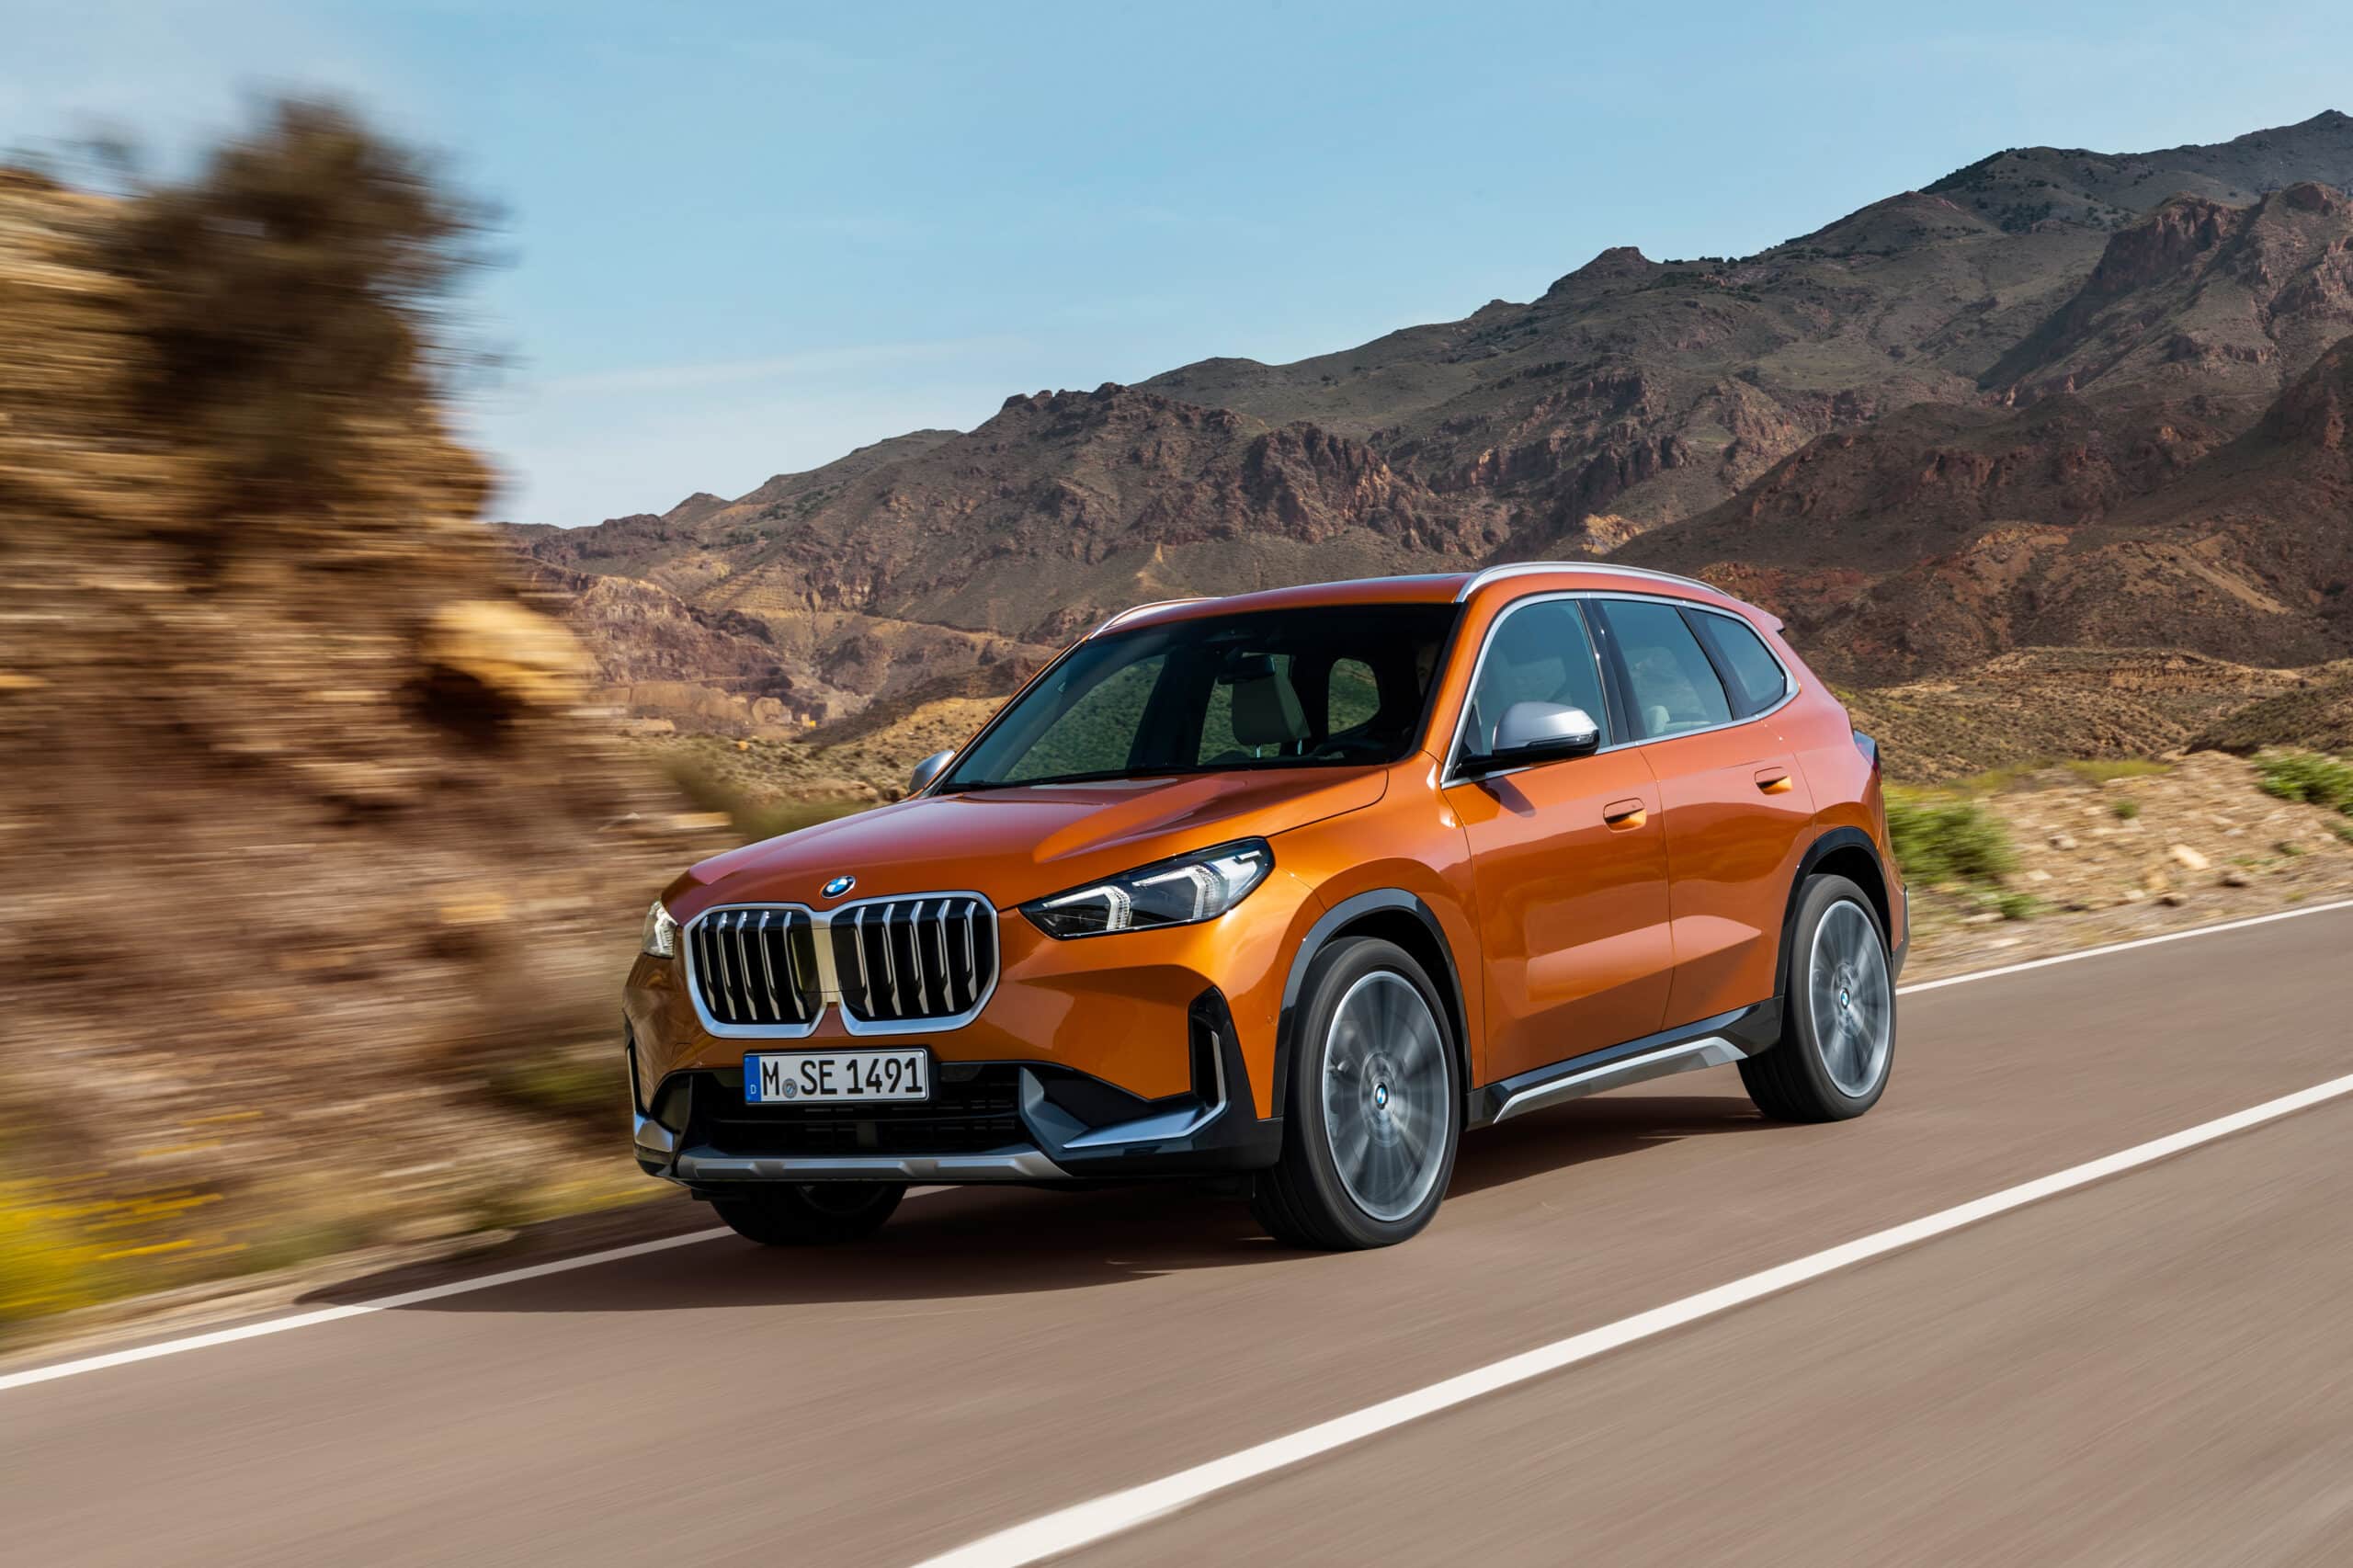 Upgraded pedestrian detection system helped earn the 2023 BMW X1 a top IIHS safety award